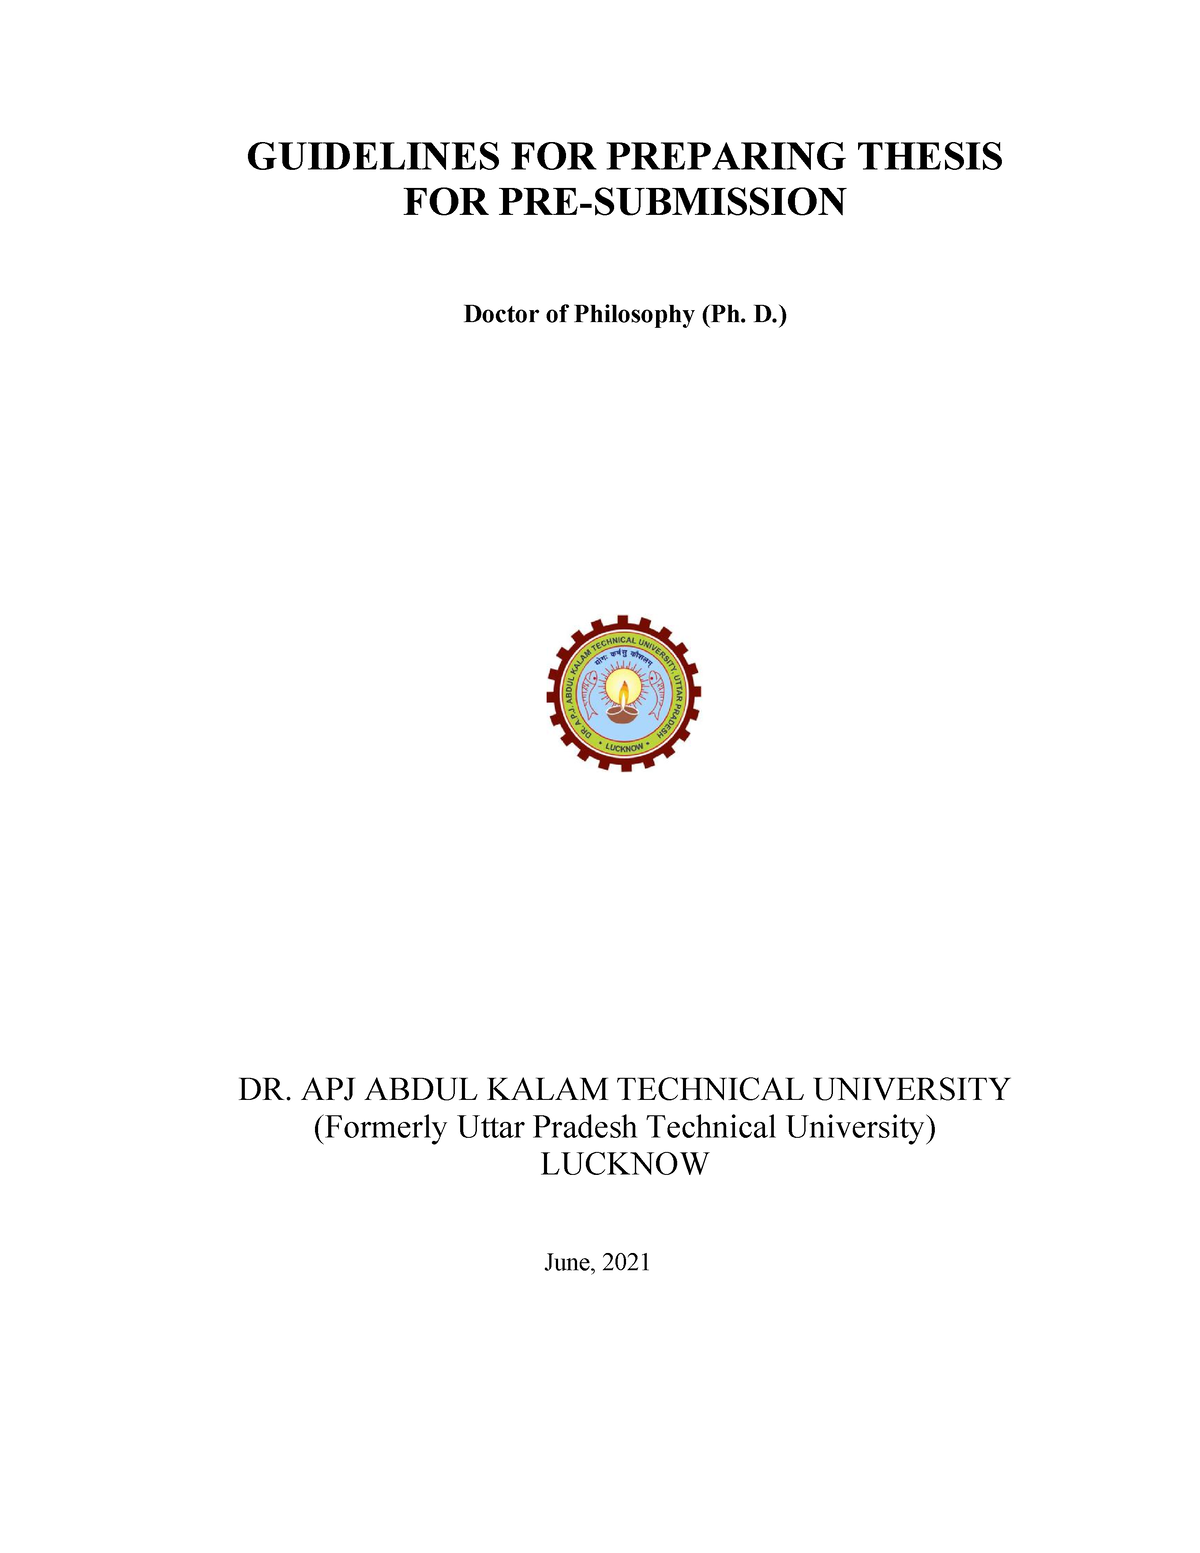 ugc guidelines for phd thesis submission 2021